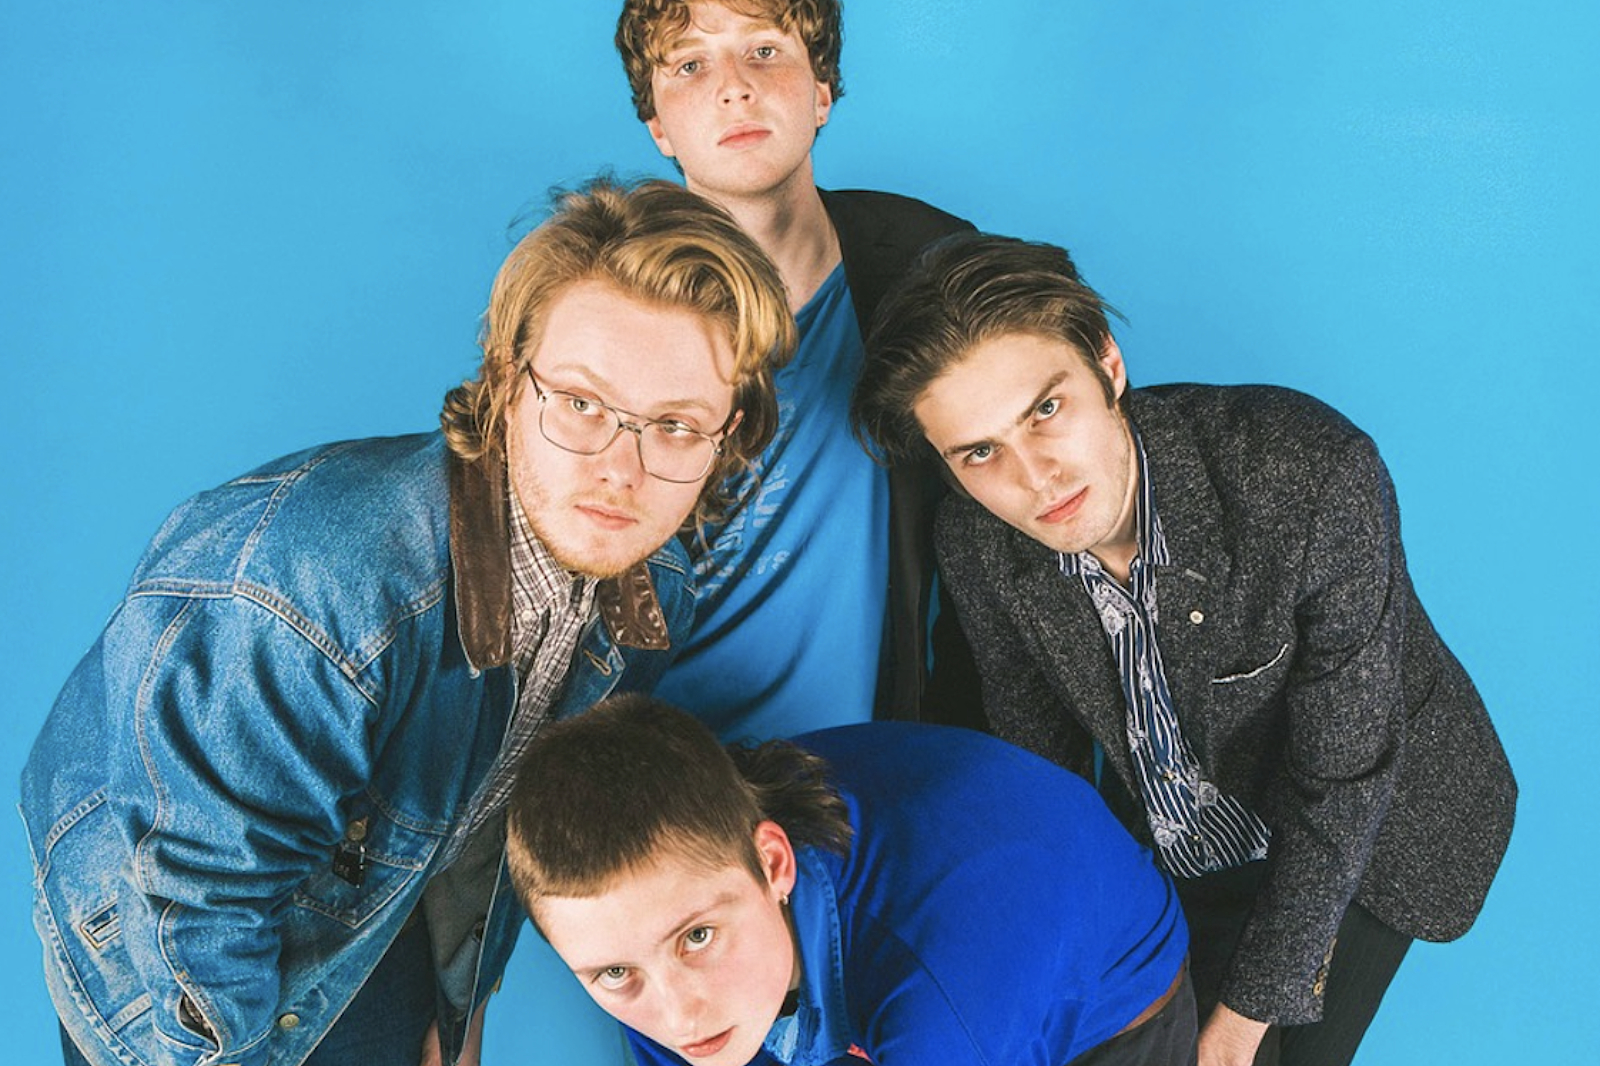 The Wha release new single 'Young Skins'